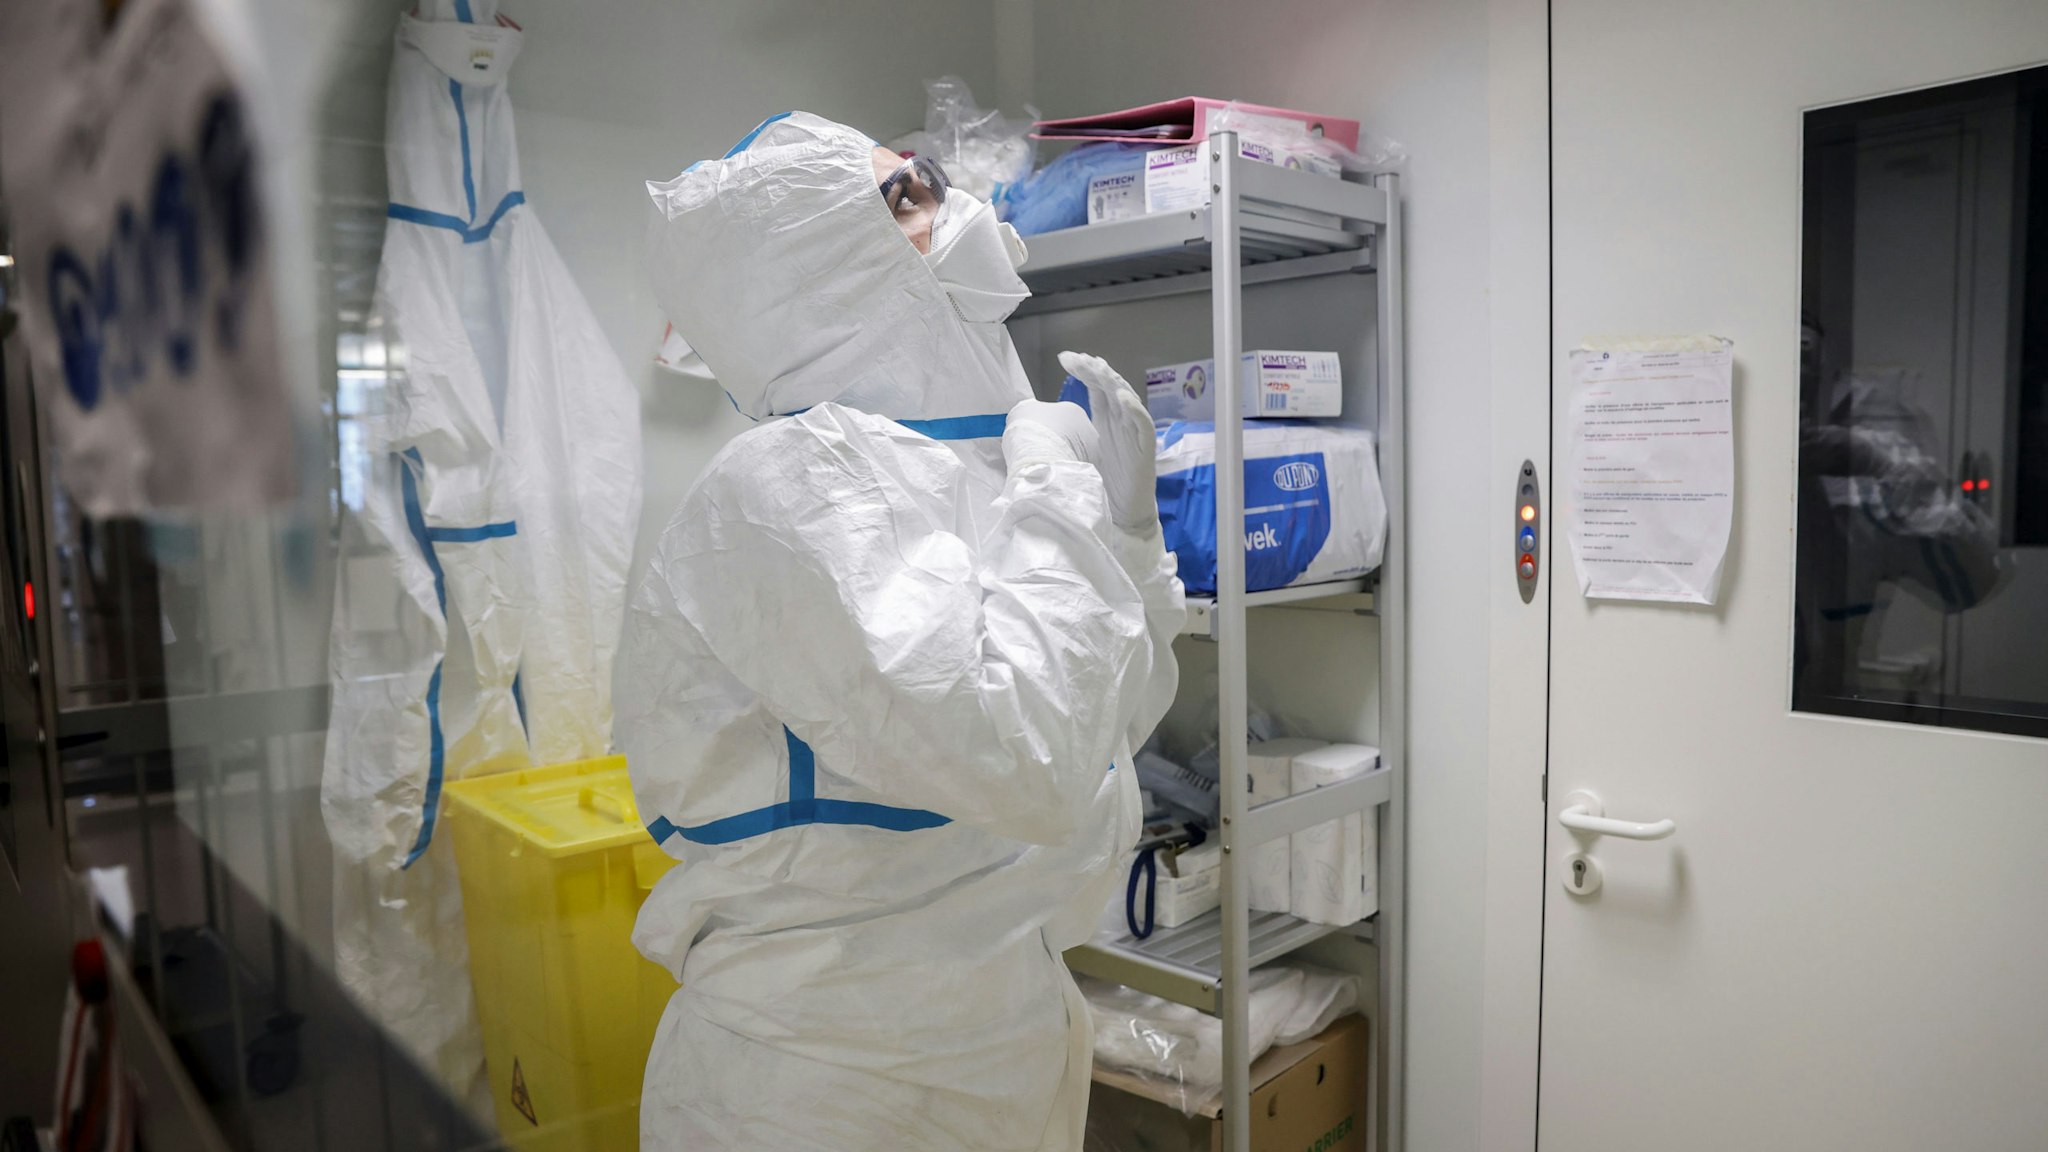 A laboratory operator puts on a protective gear before handling patients' samples in a laboratory of the National Reference Center (CNR) for respiratory viruses at the Institut Pasteur in Paris on January 28, 2020. - The CNR analyses the tests for respiratory viruses among which coronavirus. The deadly new coronavirus that has broken out in China, 2019-nCoV, has so far killed 106 people and infected over 4,000 -- the bulk of them in and around Wuhan.